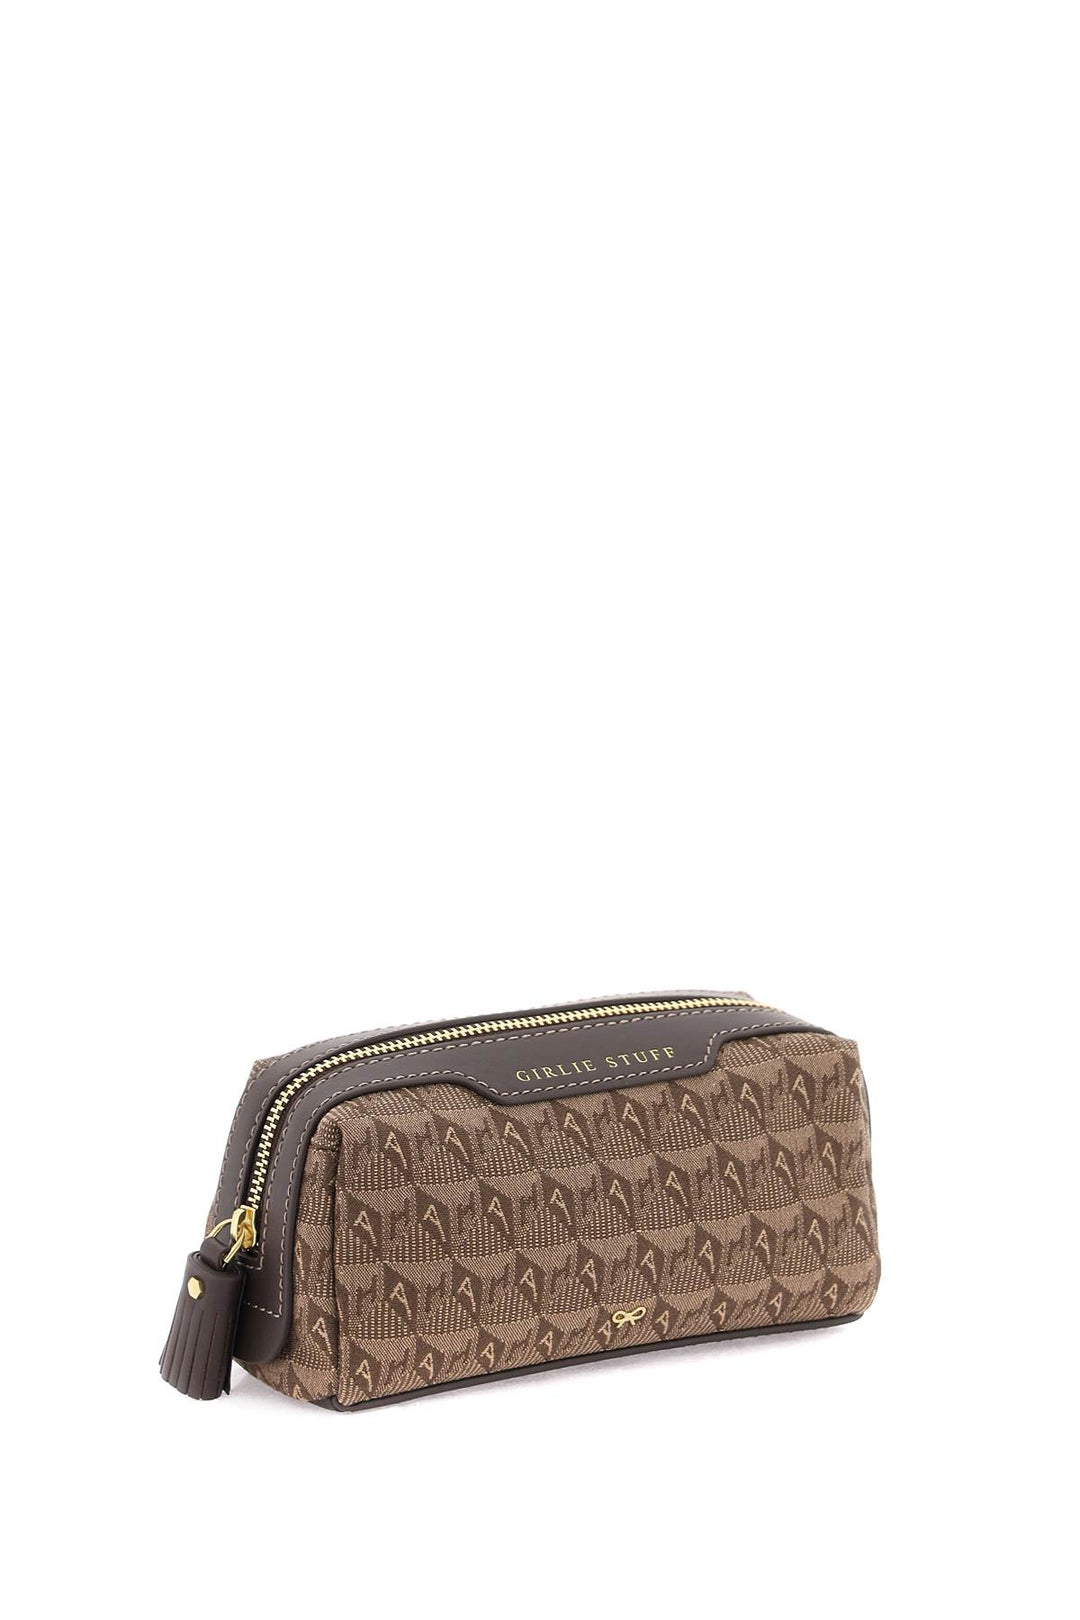 Pouch Girlie Stuff - Anya Hindmarch - Donna